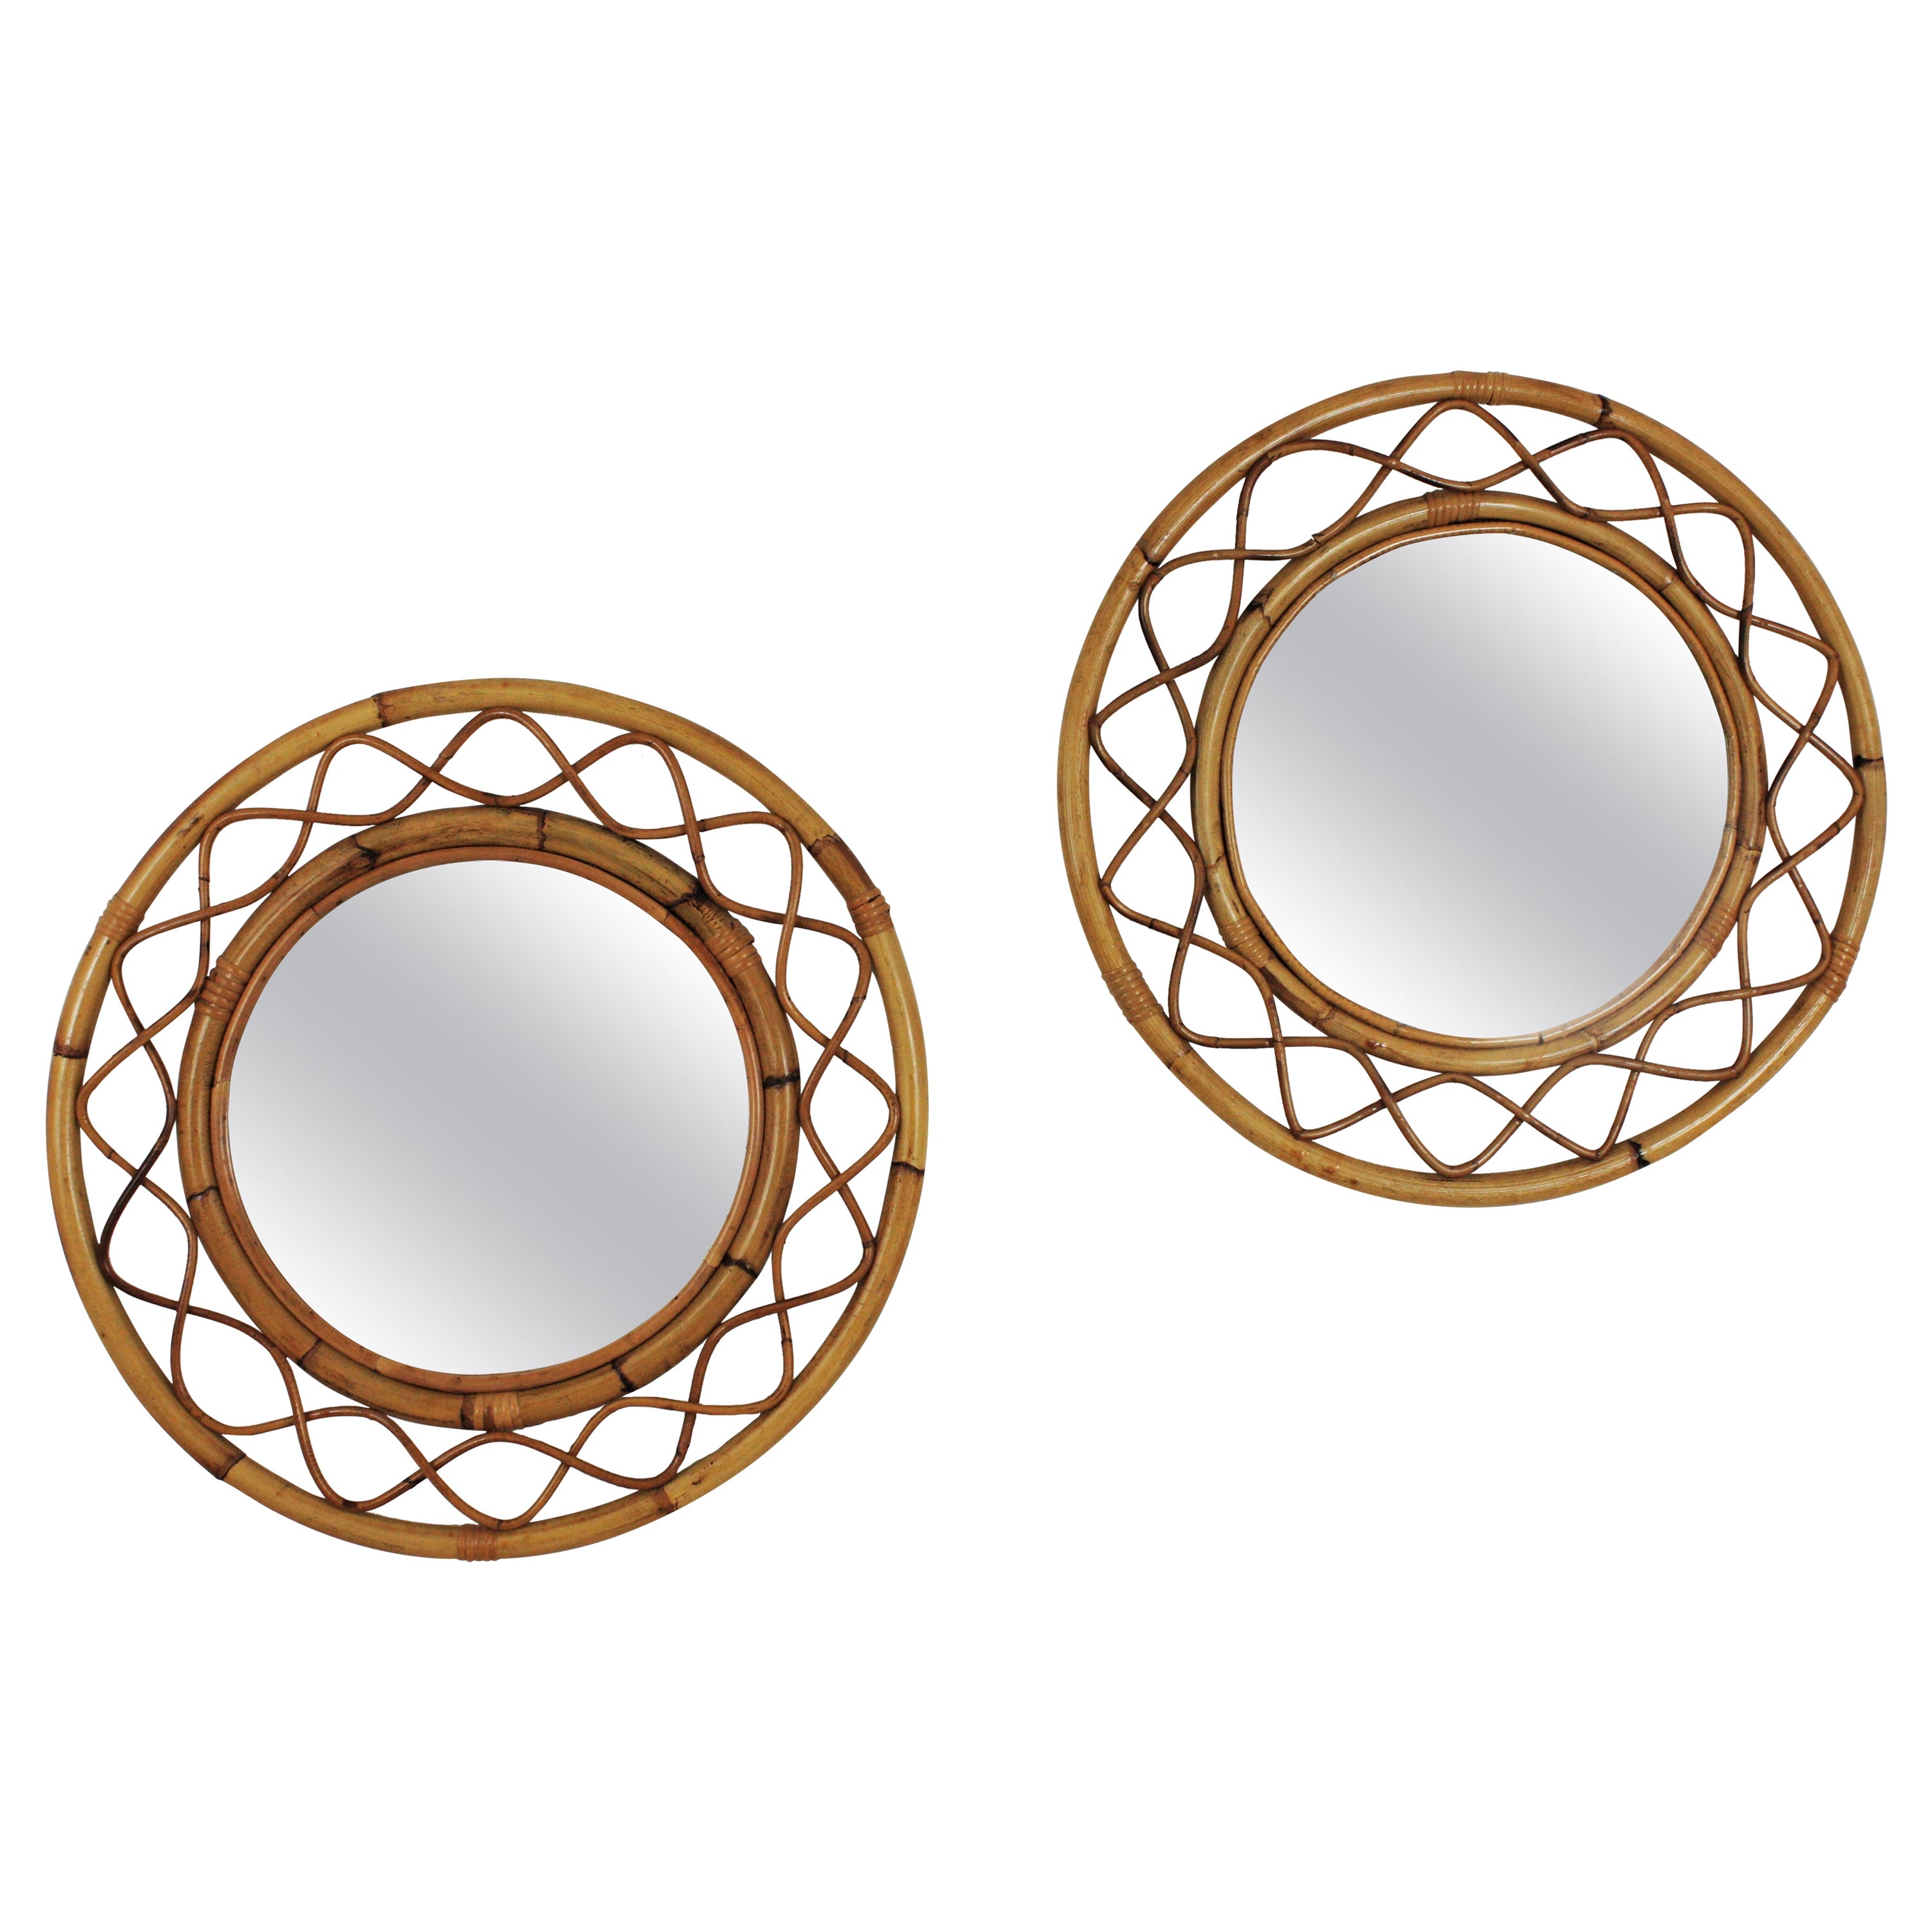 Pair of Rattan Bamboo Round Mirrors, Franco Albini Style